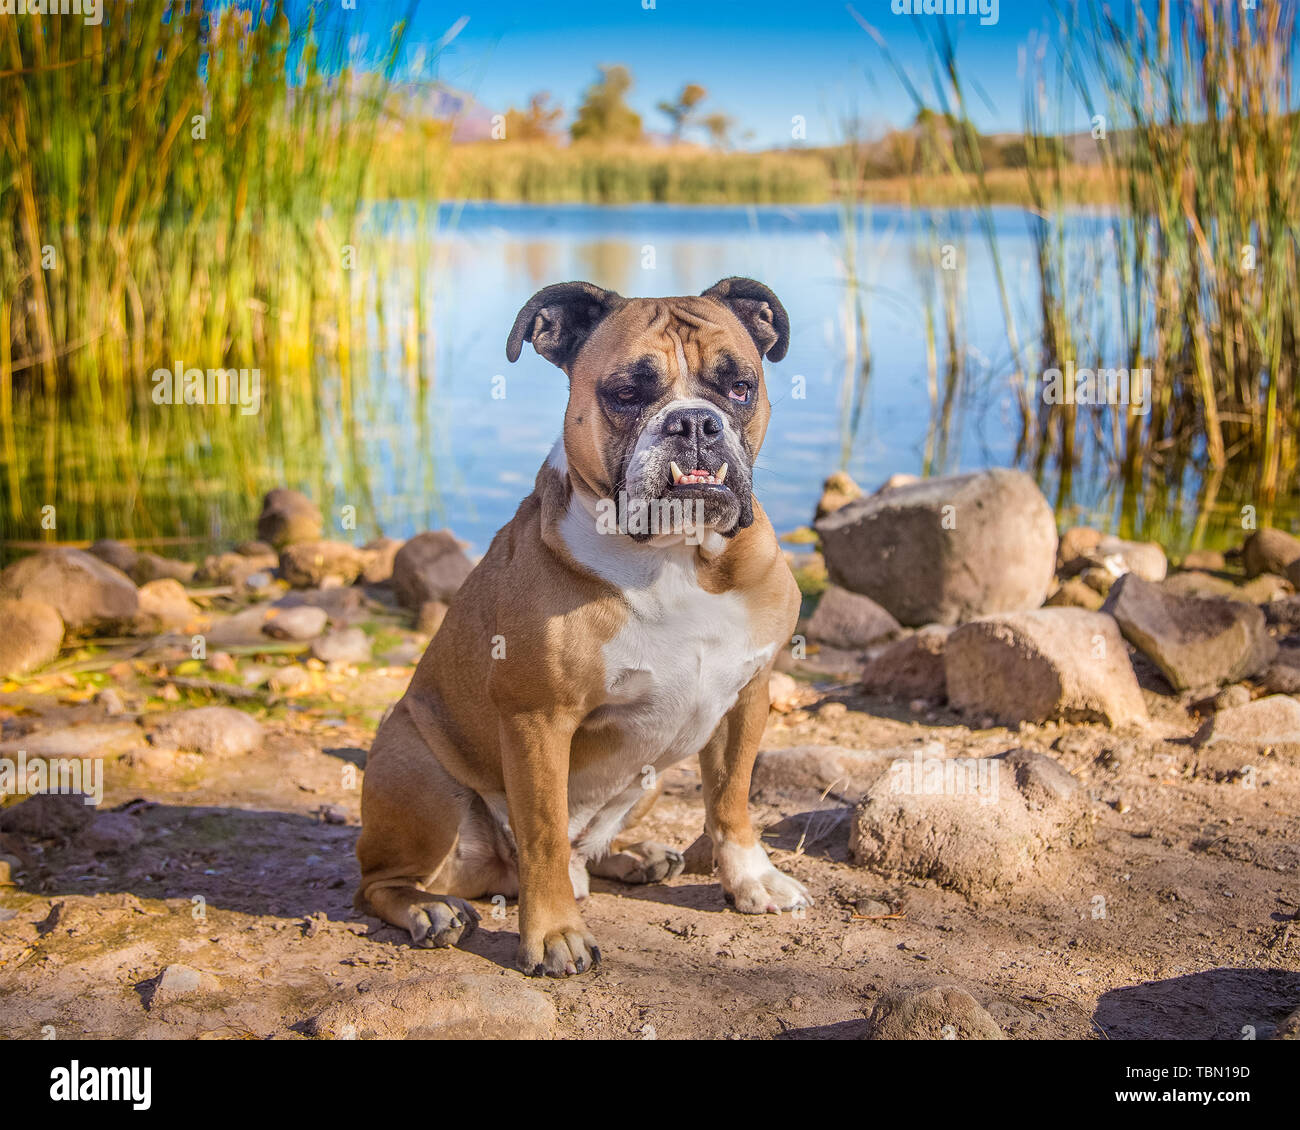 Bulldog posed for a portrait by a pond Stock Photo